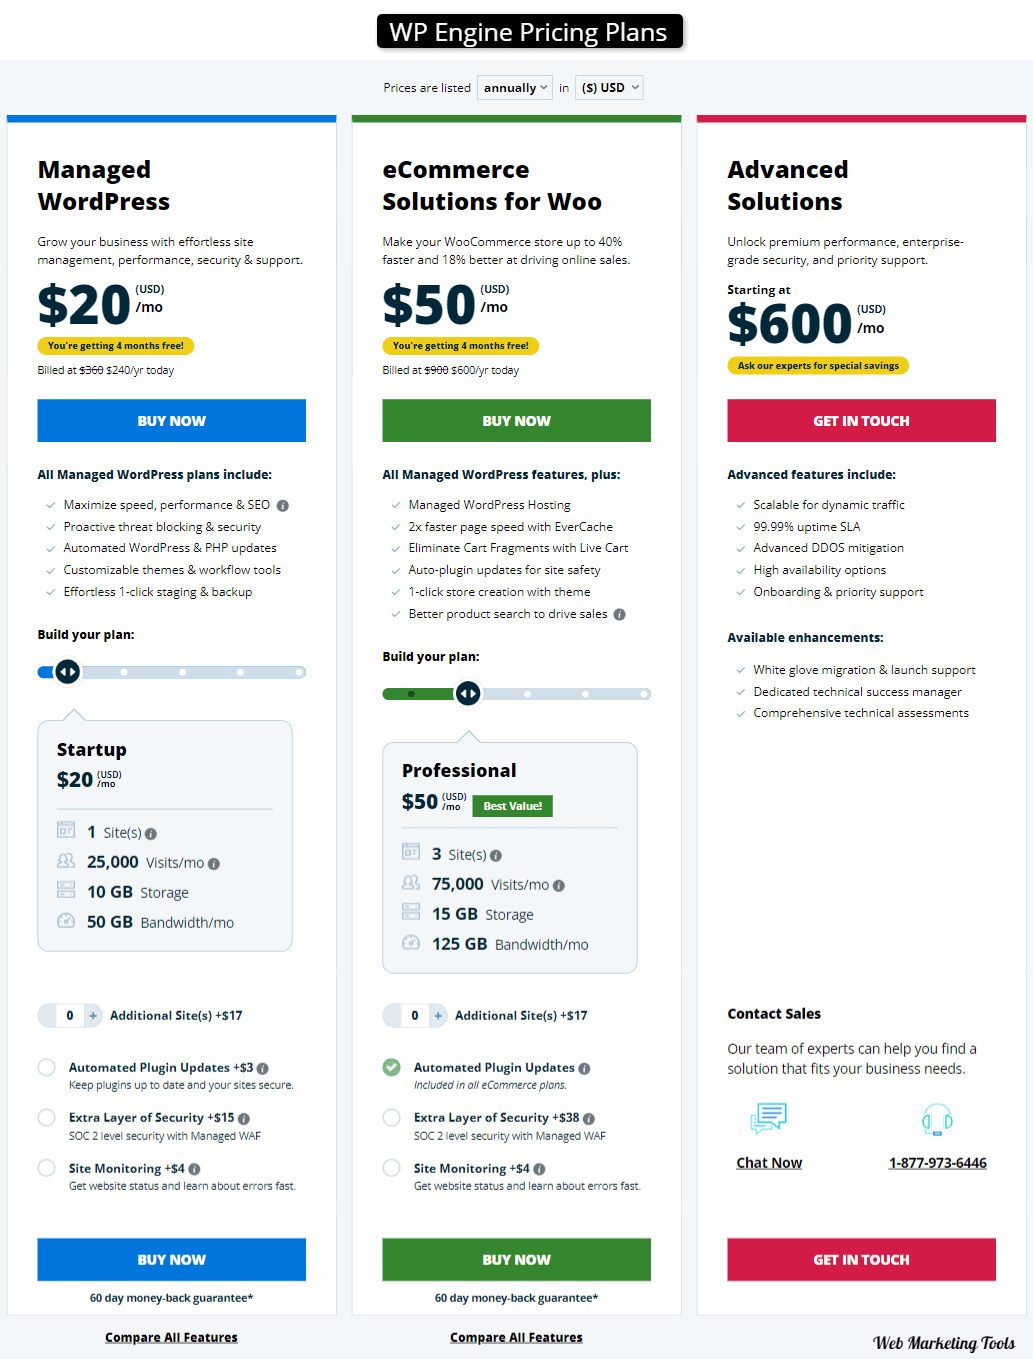 WP-Engine Pricing Plans